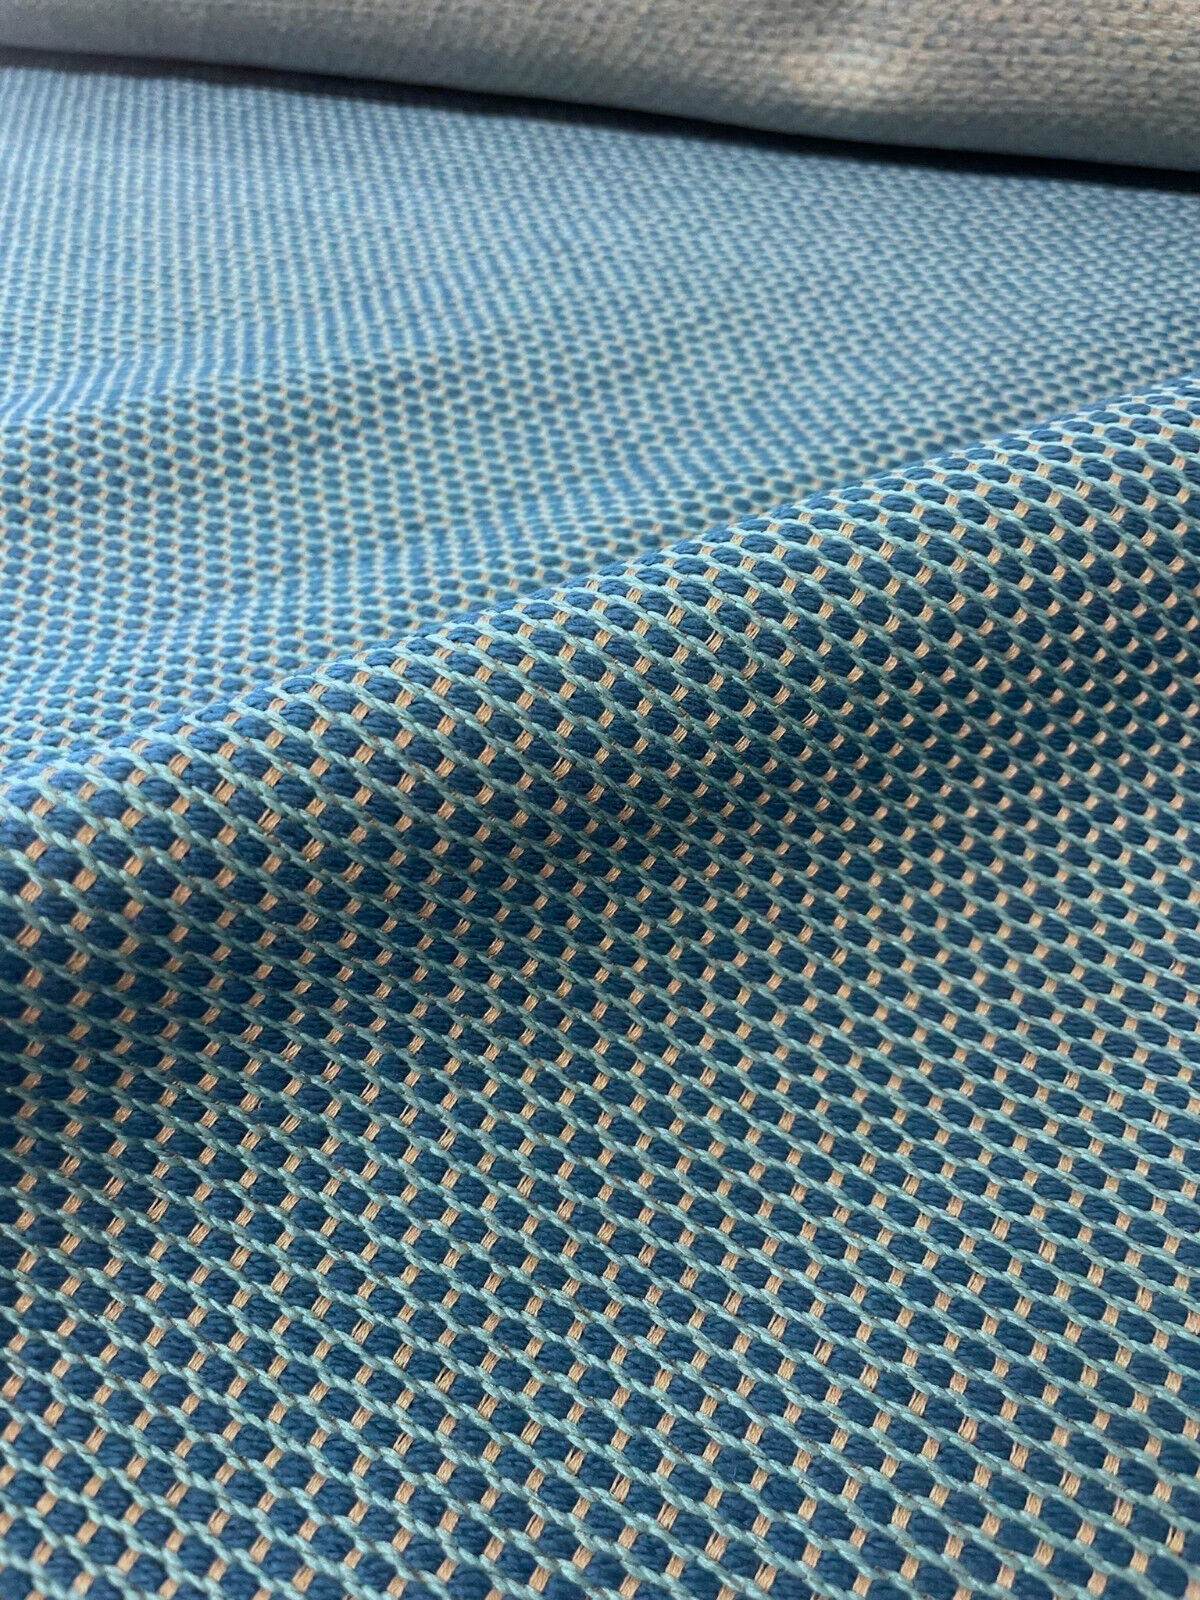 12.875 yds HBF Poppy Pool Blue  Nubby Cotton Blend Upholstery Fabric MSRP 450